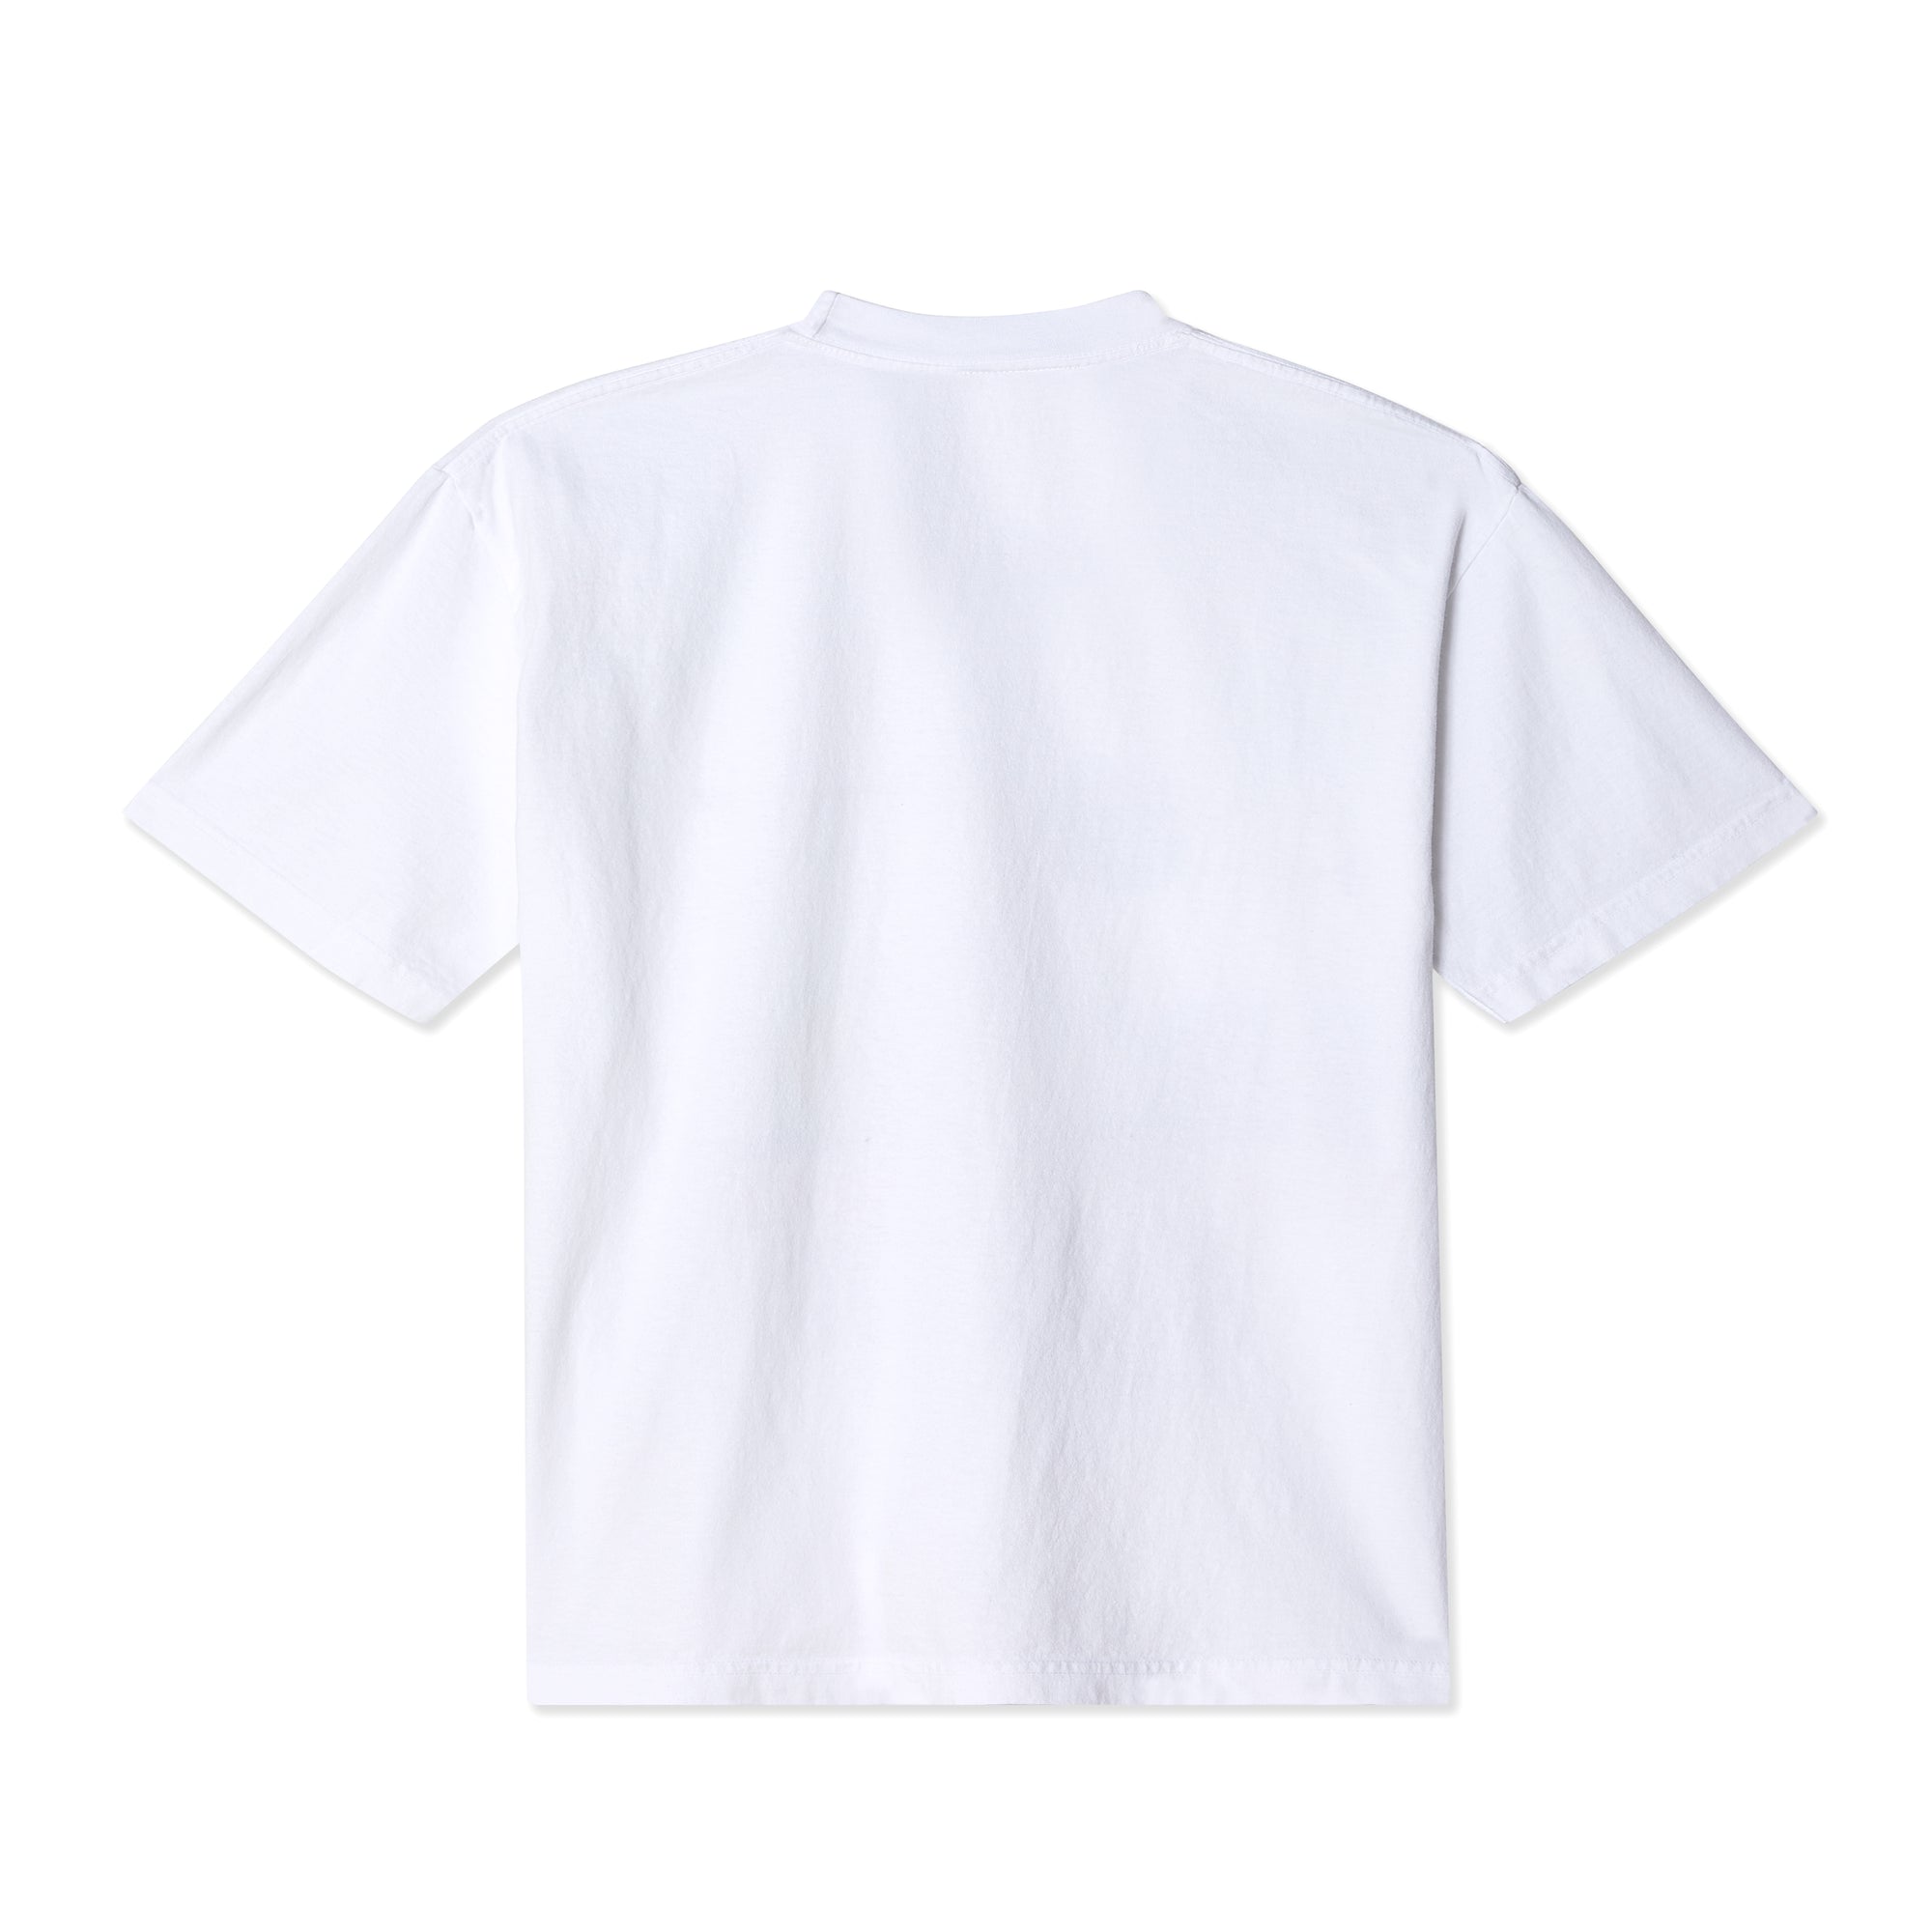 Online Ceramics - Who Is The Brains Behind This Operation T-Shirt - (White) view 2